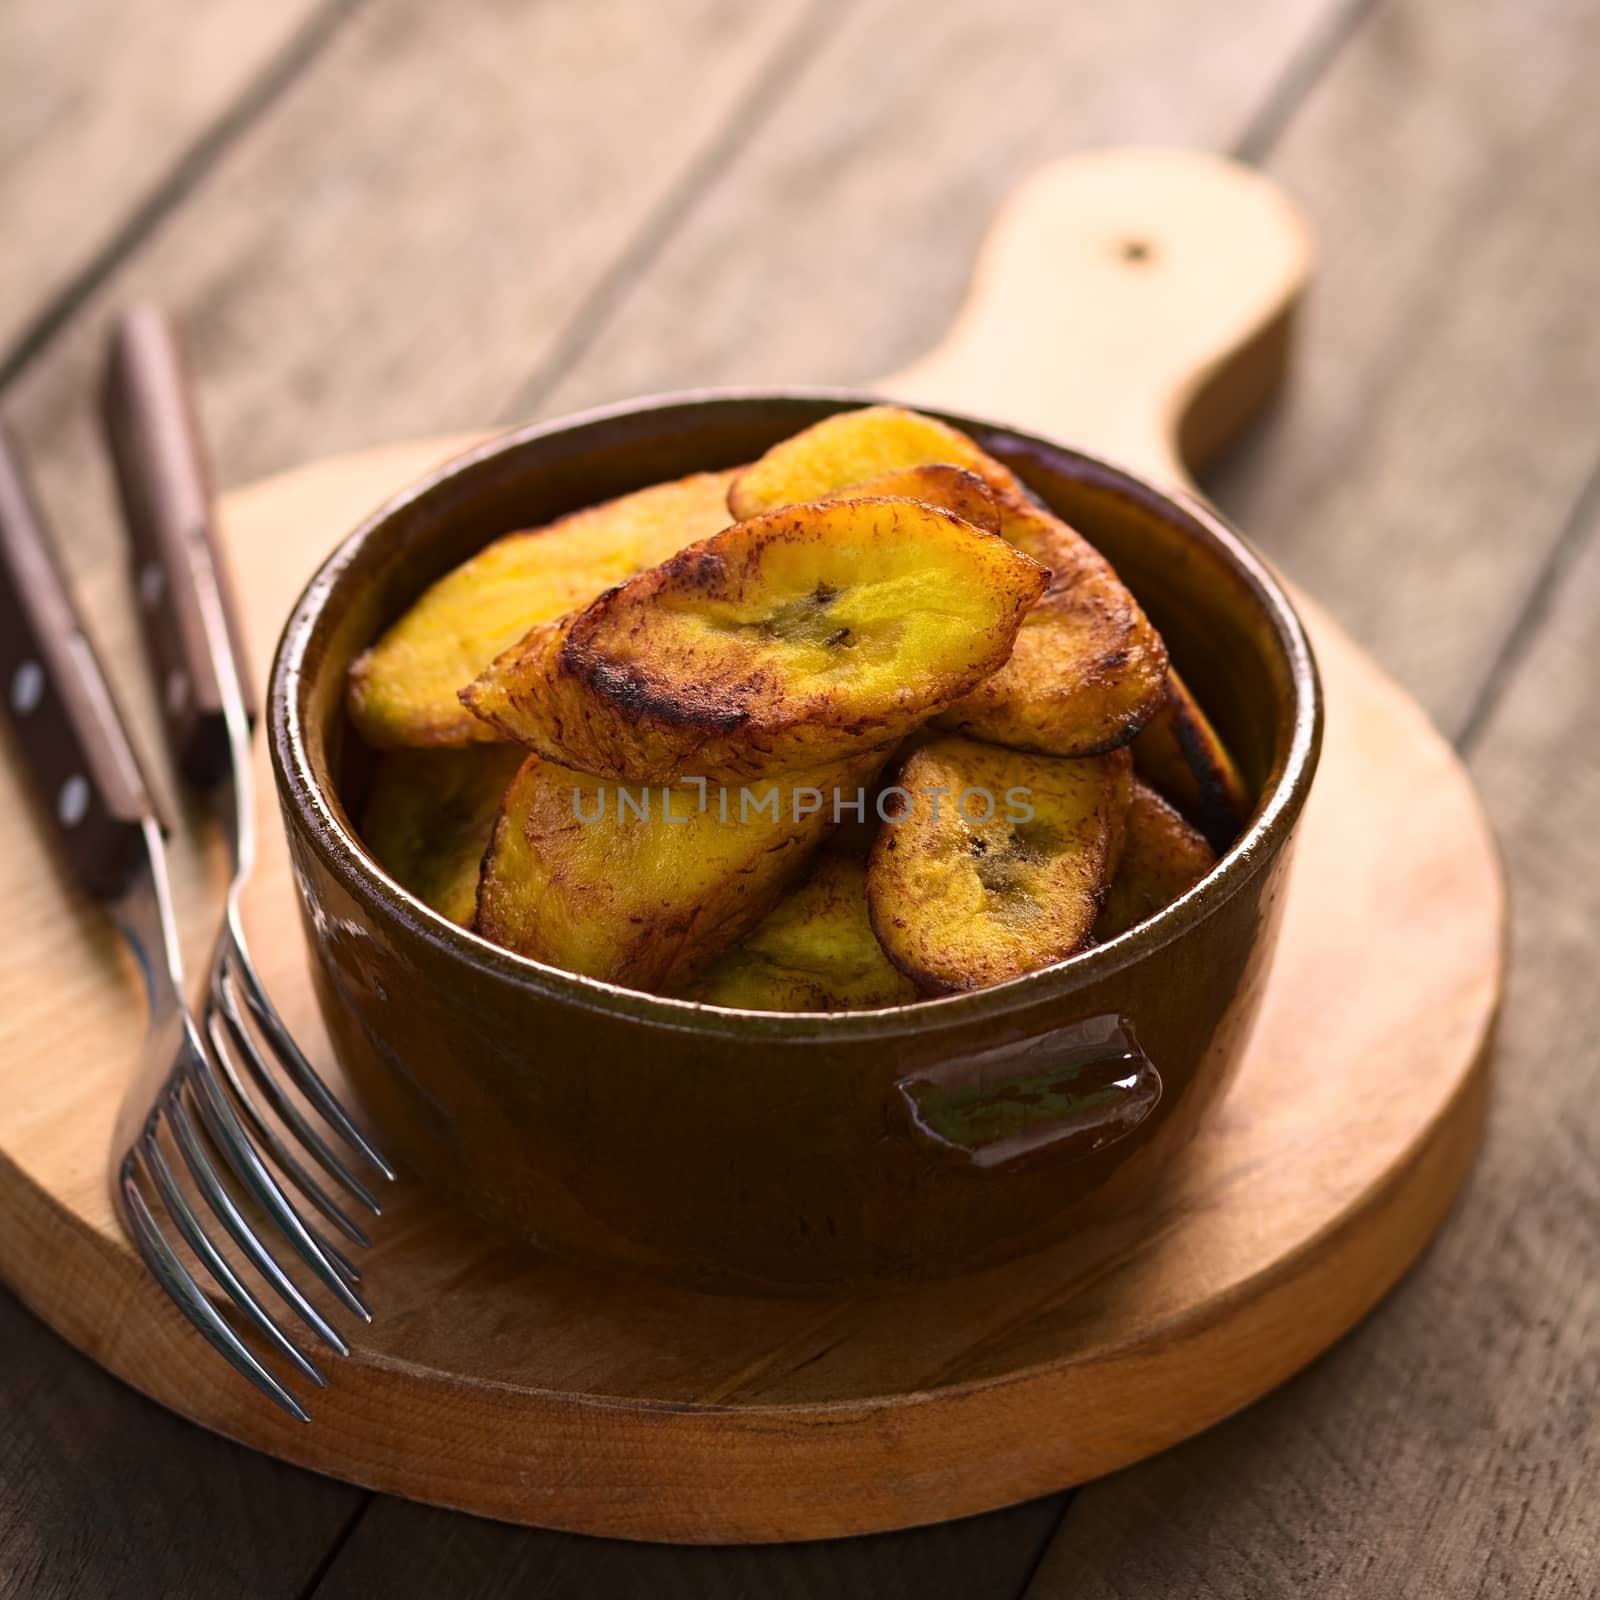 Fried slices of the ripe plantain in bowl, which can be eaten as snack or is used to accompany dishes in some South American countries (Selective Focus, Focus on the front of the upper plantain slice)